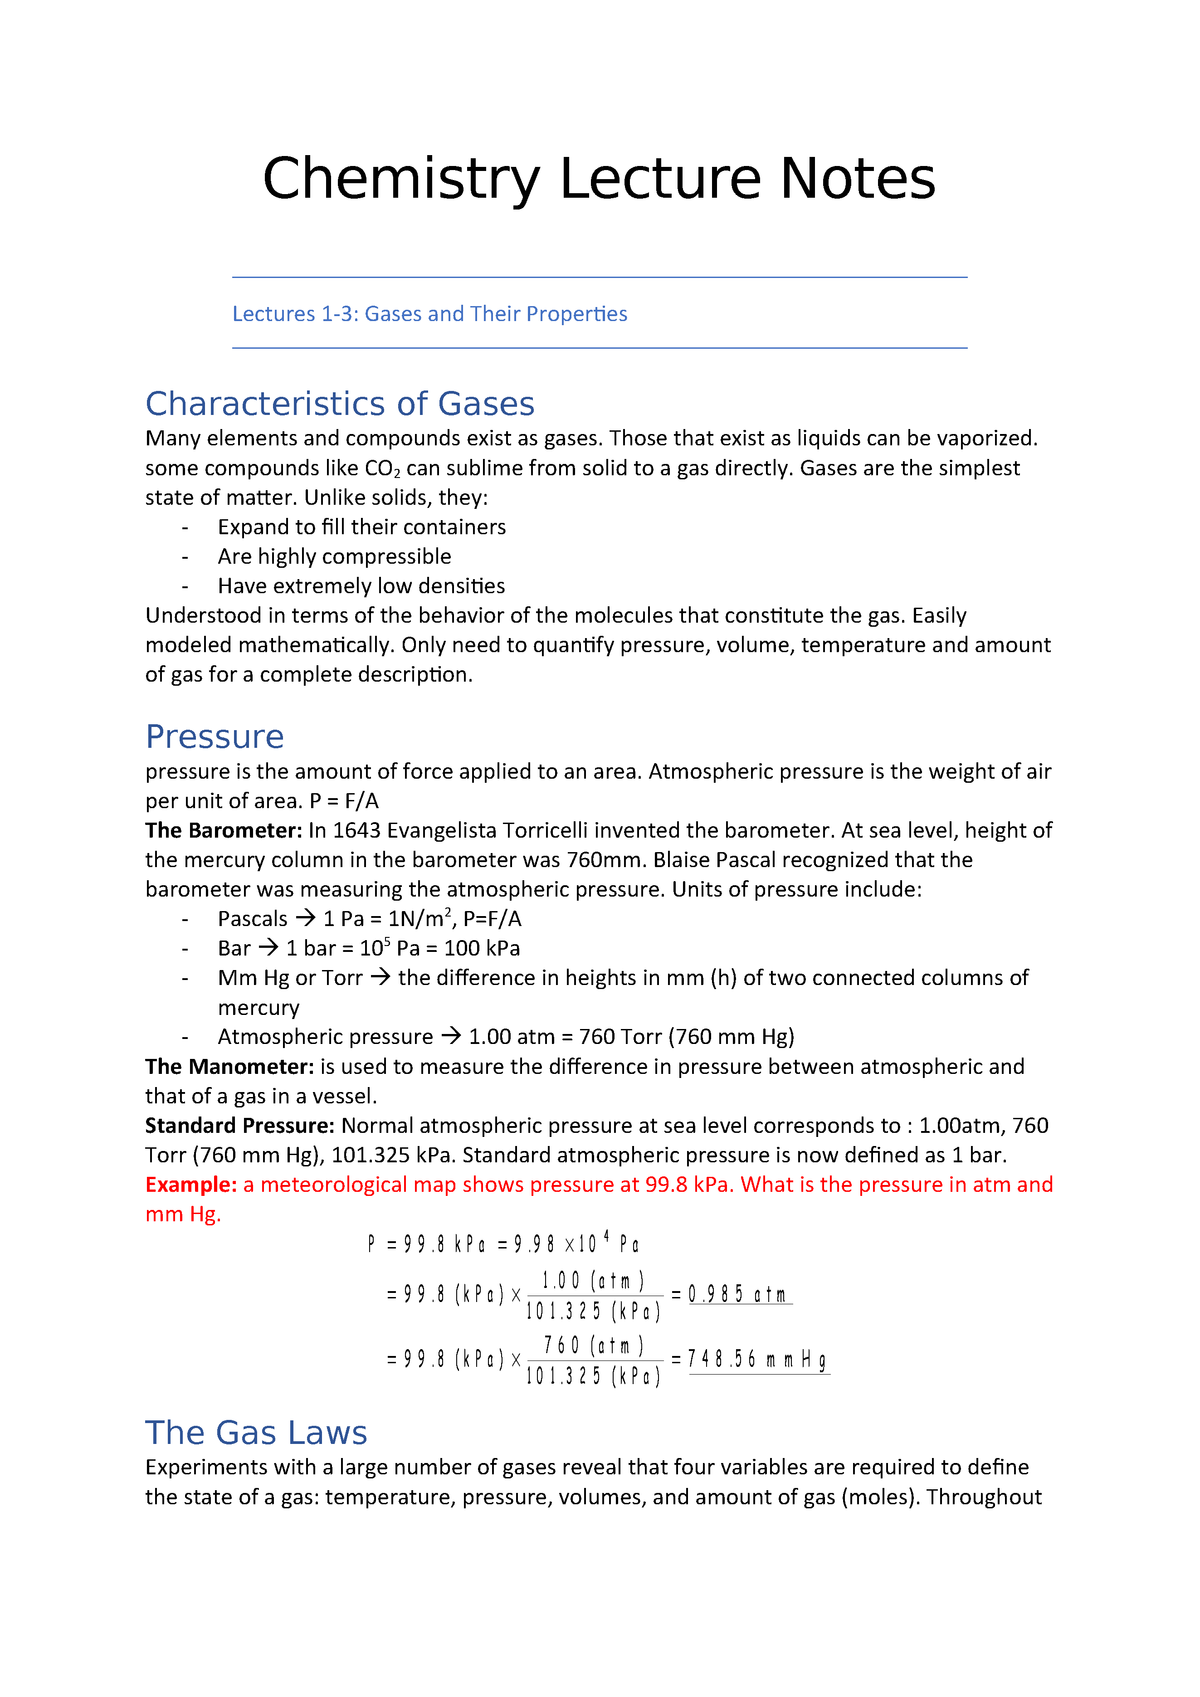 Chemistry Lecture Notes Chem1010 Chemistry Lecture Notes Lectures Gases And Studocu